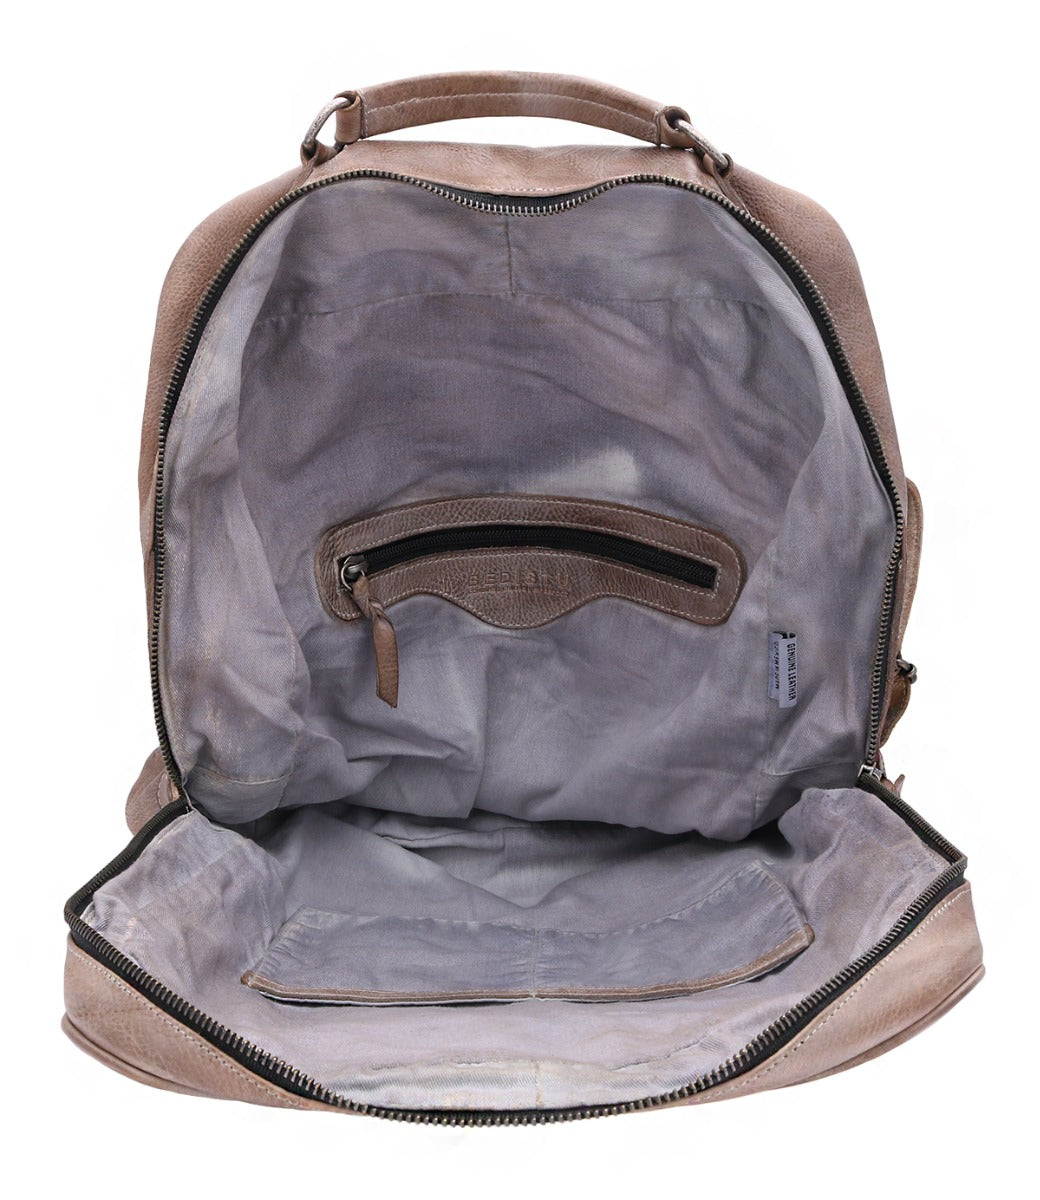 The inside of a Bed Stu backpack with a zippered compartment.